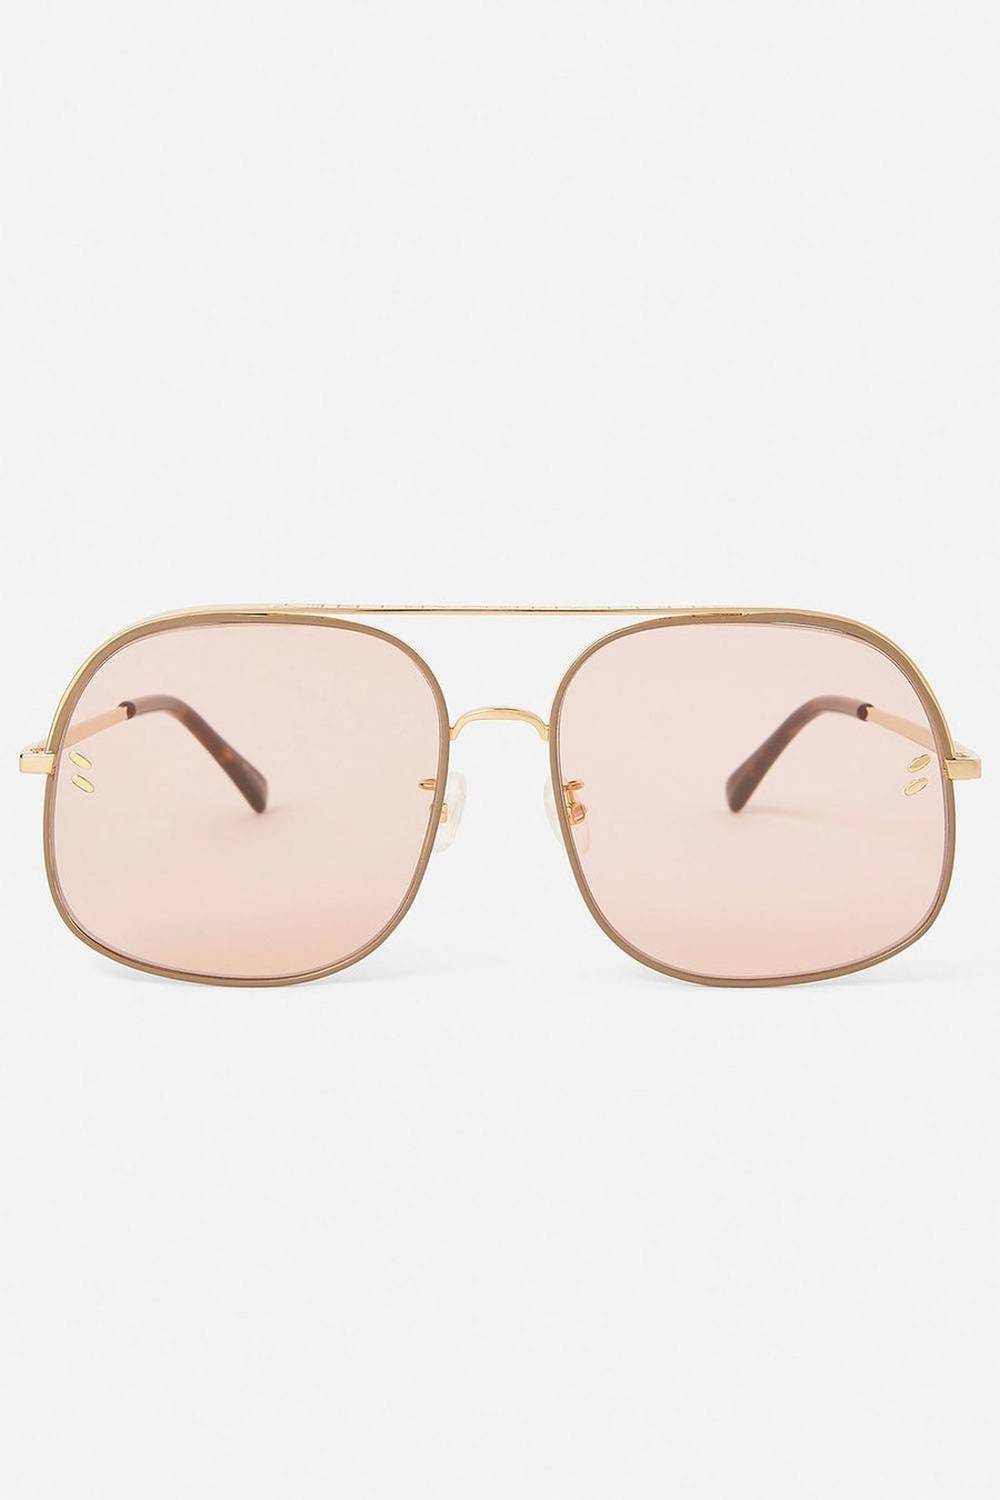 15 Best Affordable And Sustainable Eyewear Brands | Panaprium